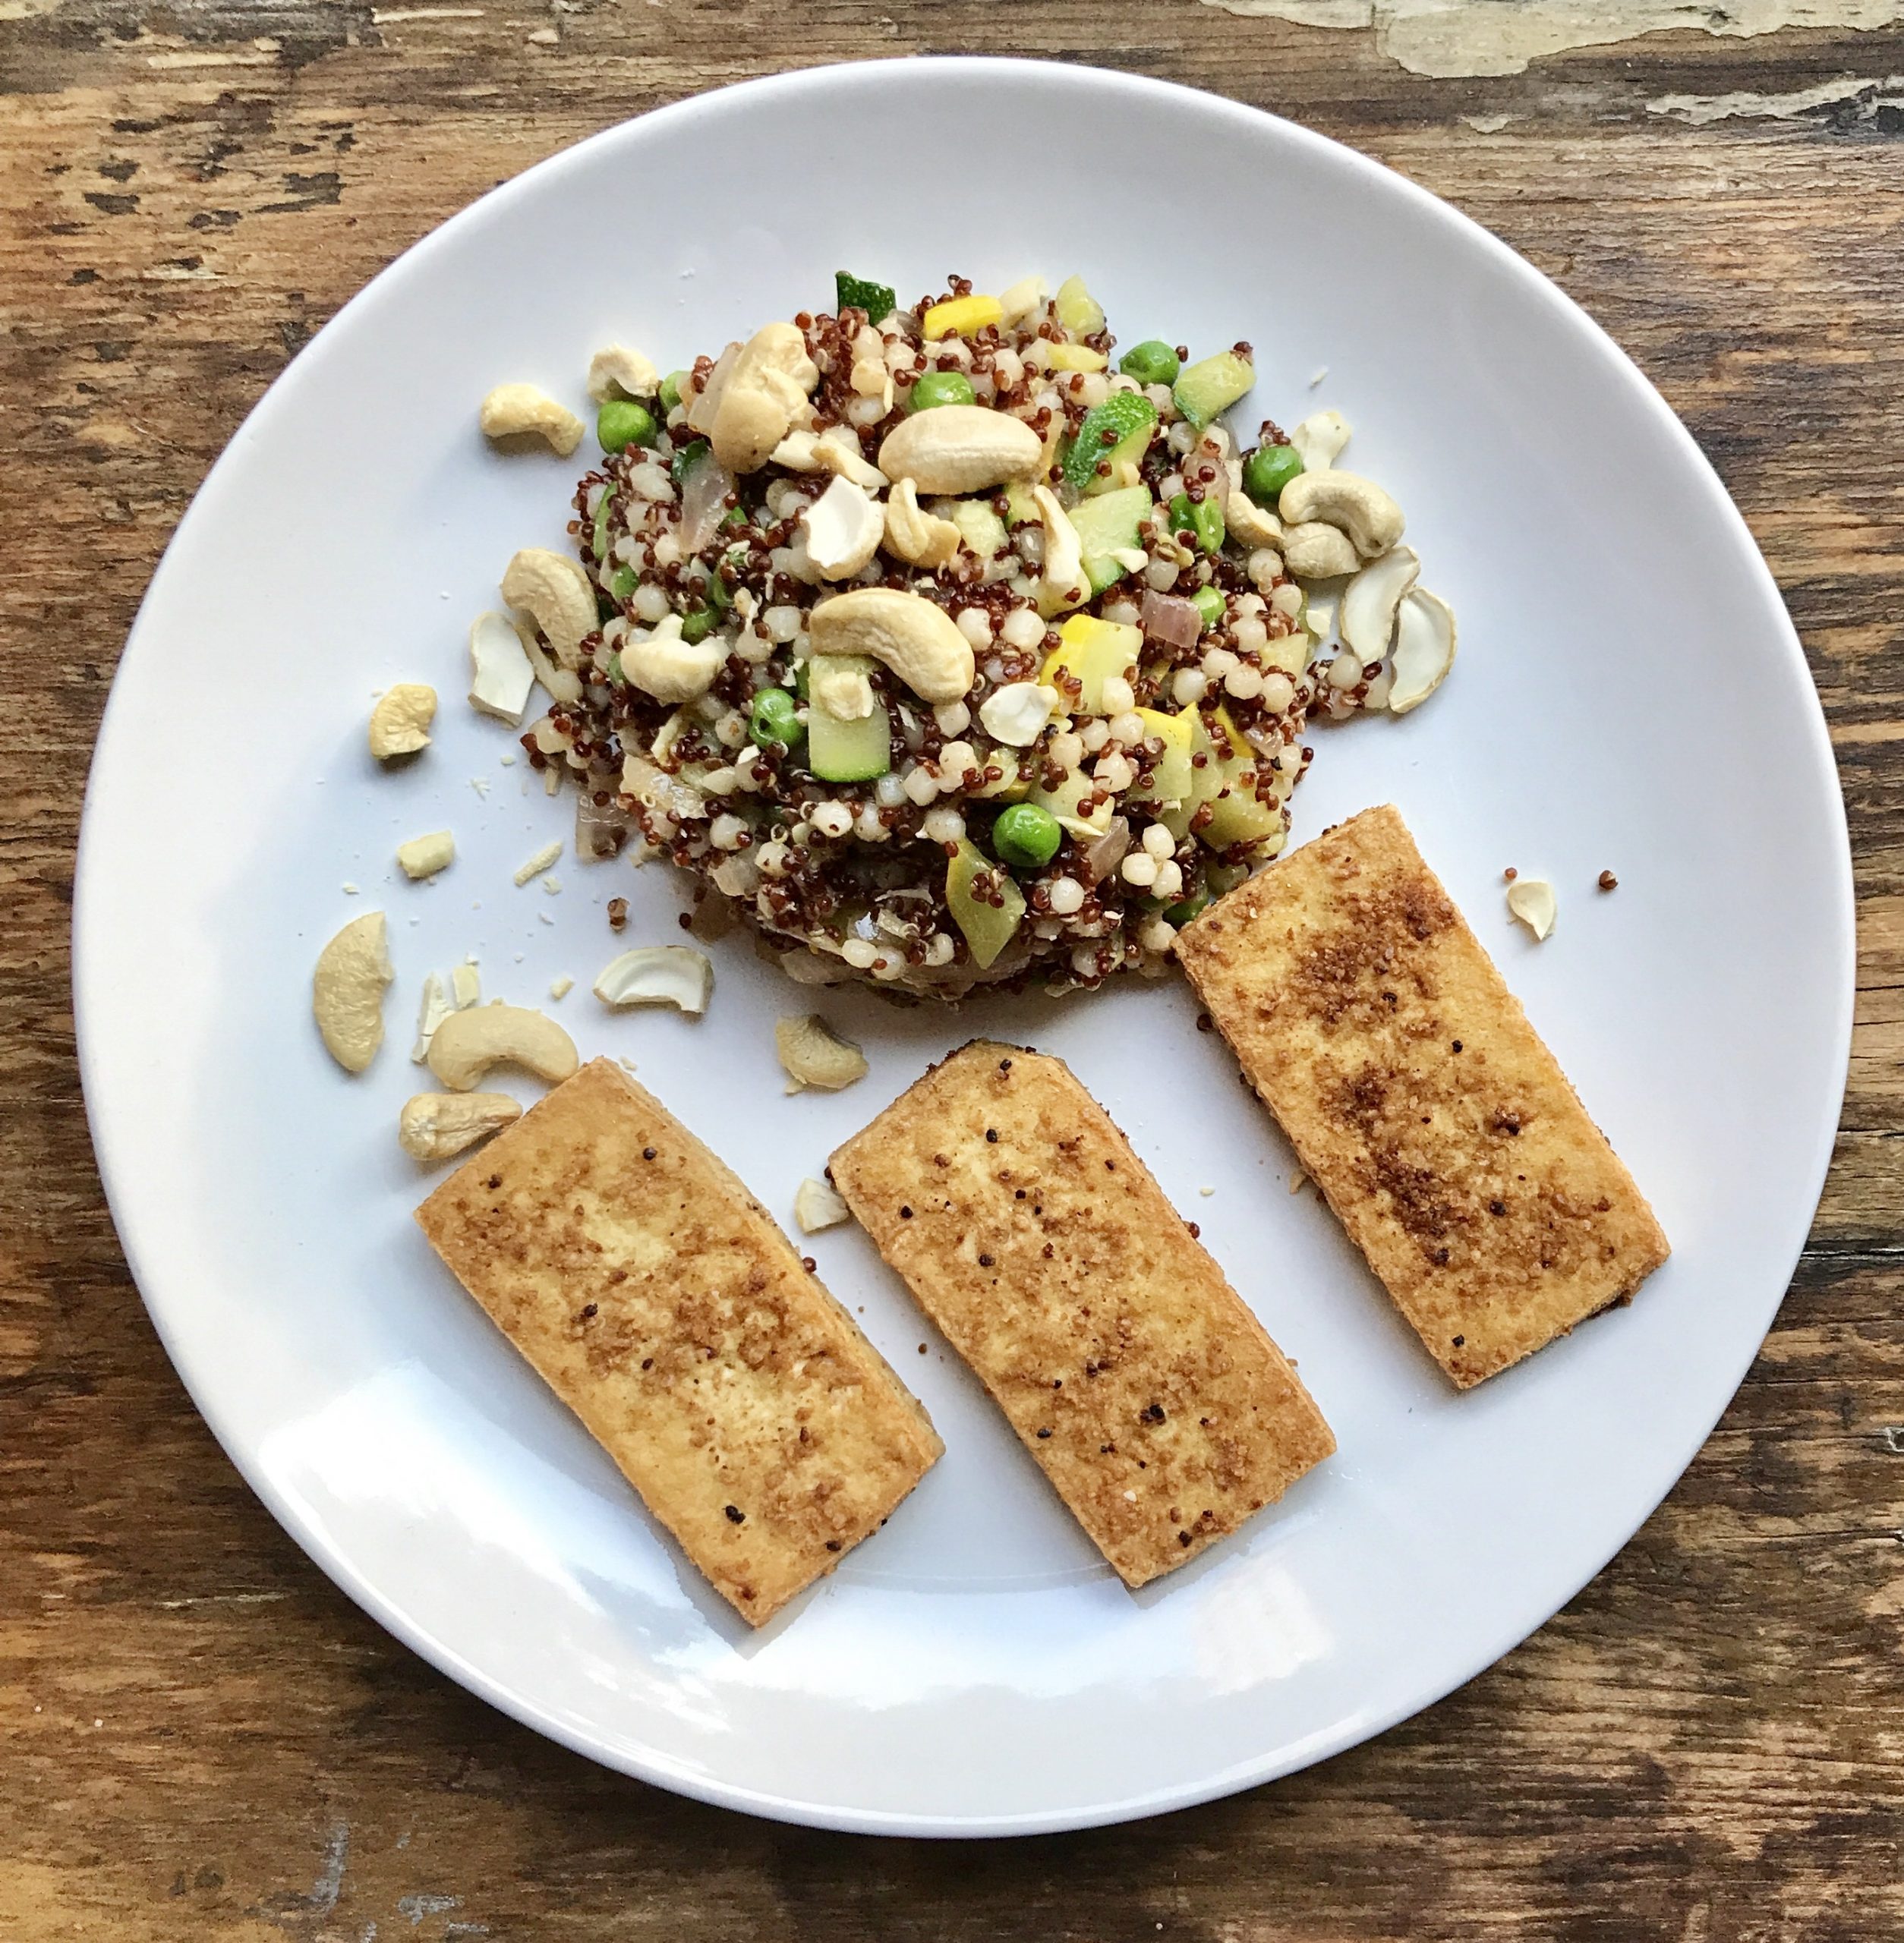 Fried tofu with mixed Grains